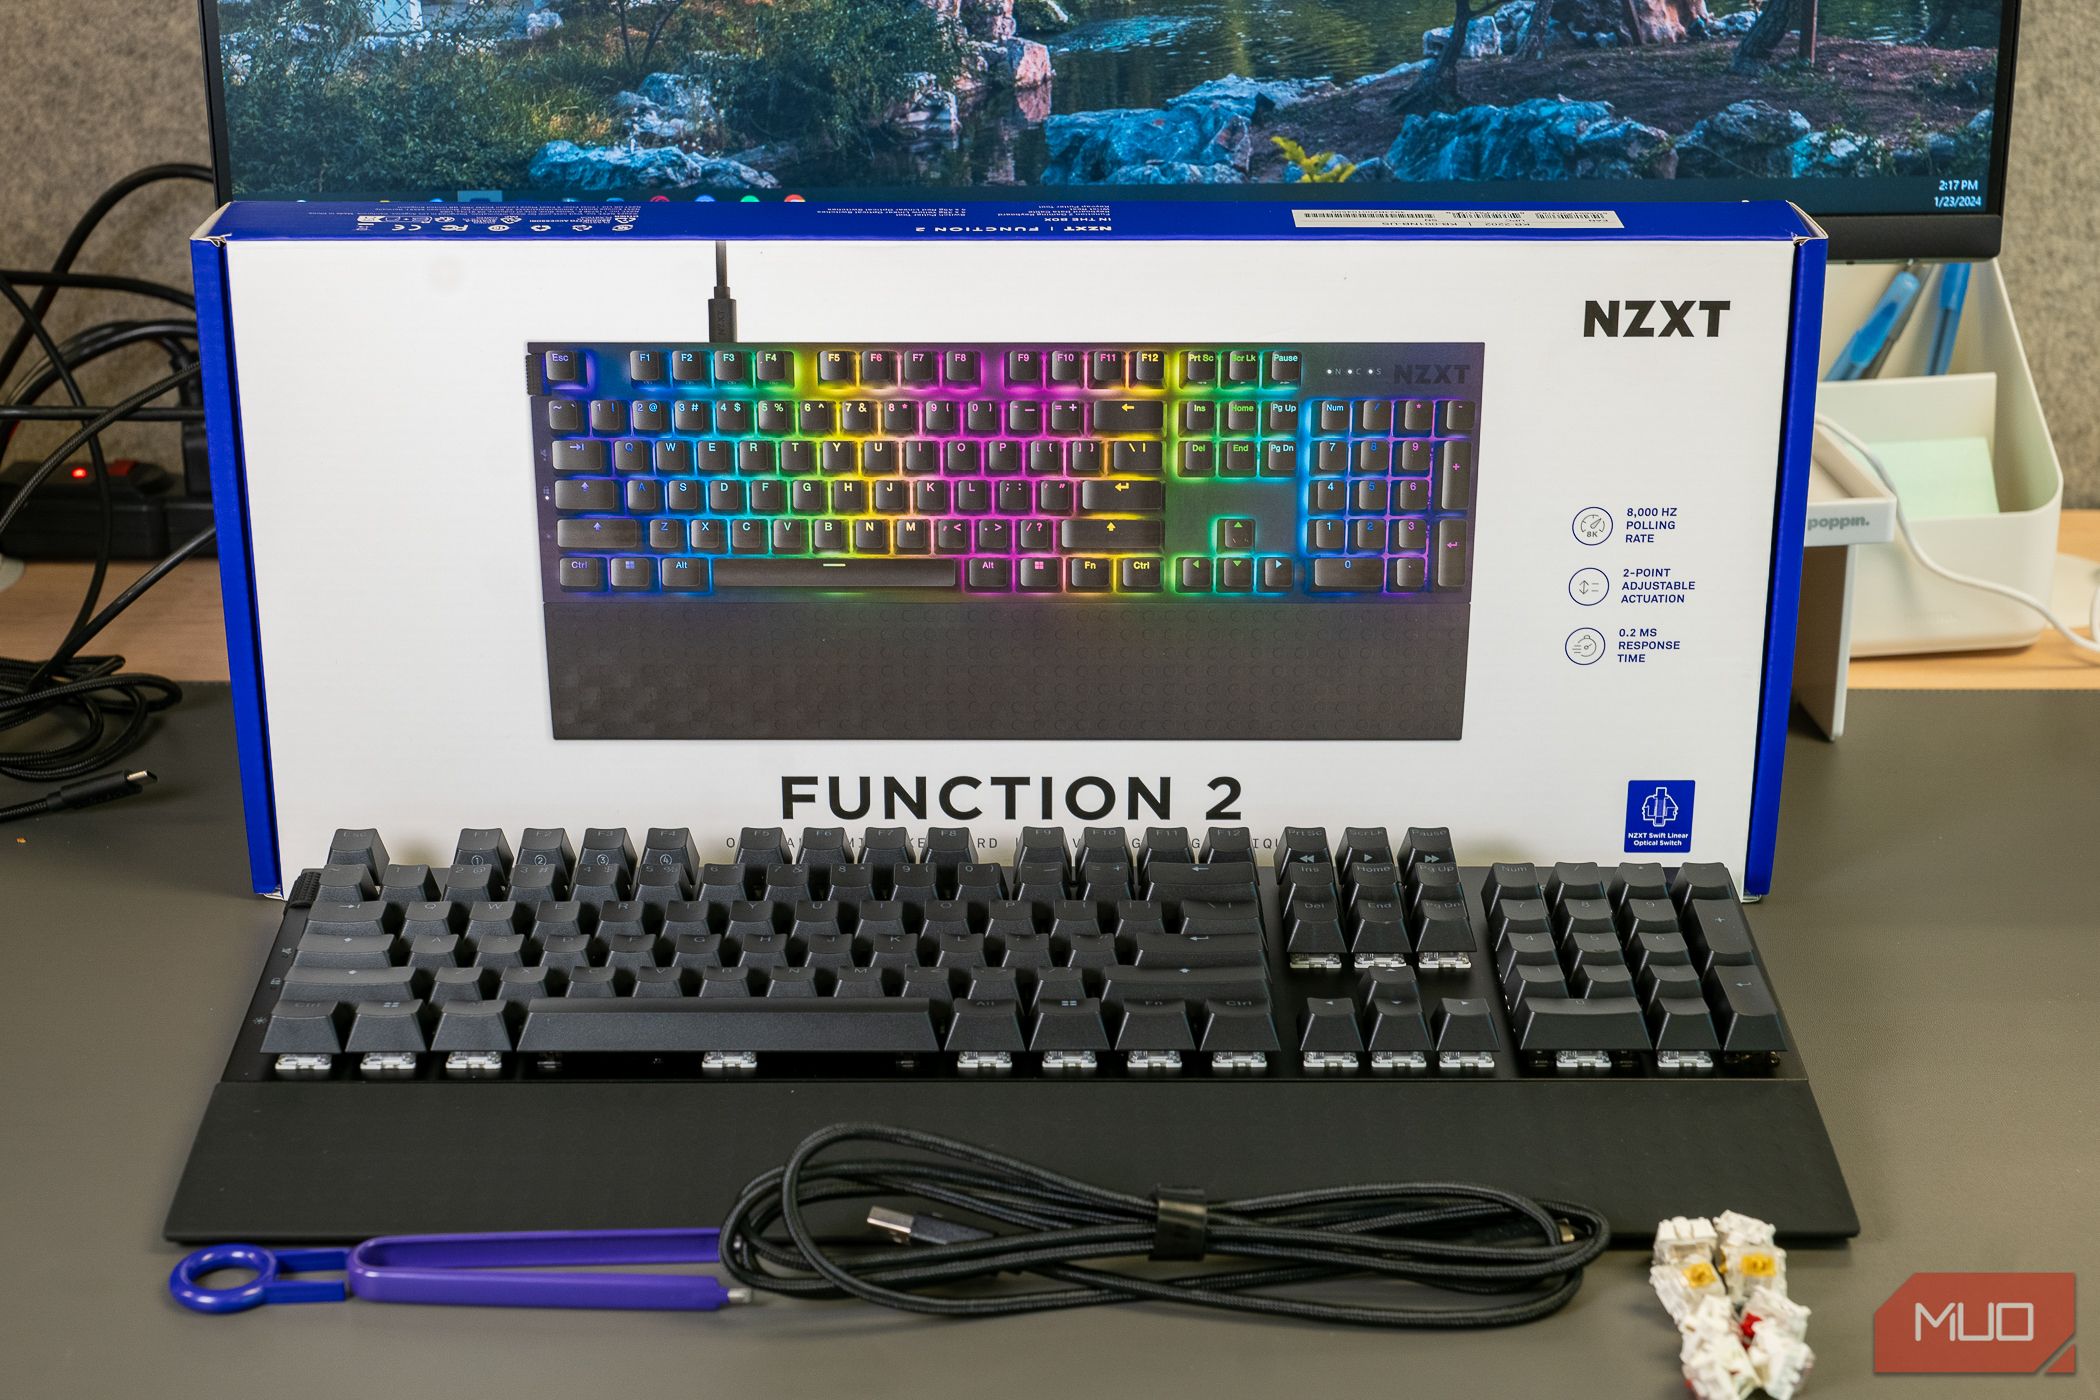 NZXT Function 2 keyboard in front of box